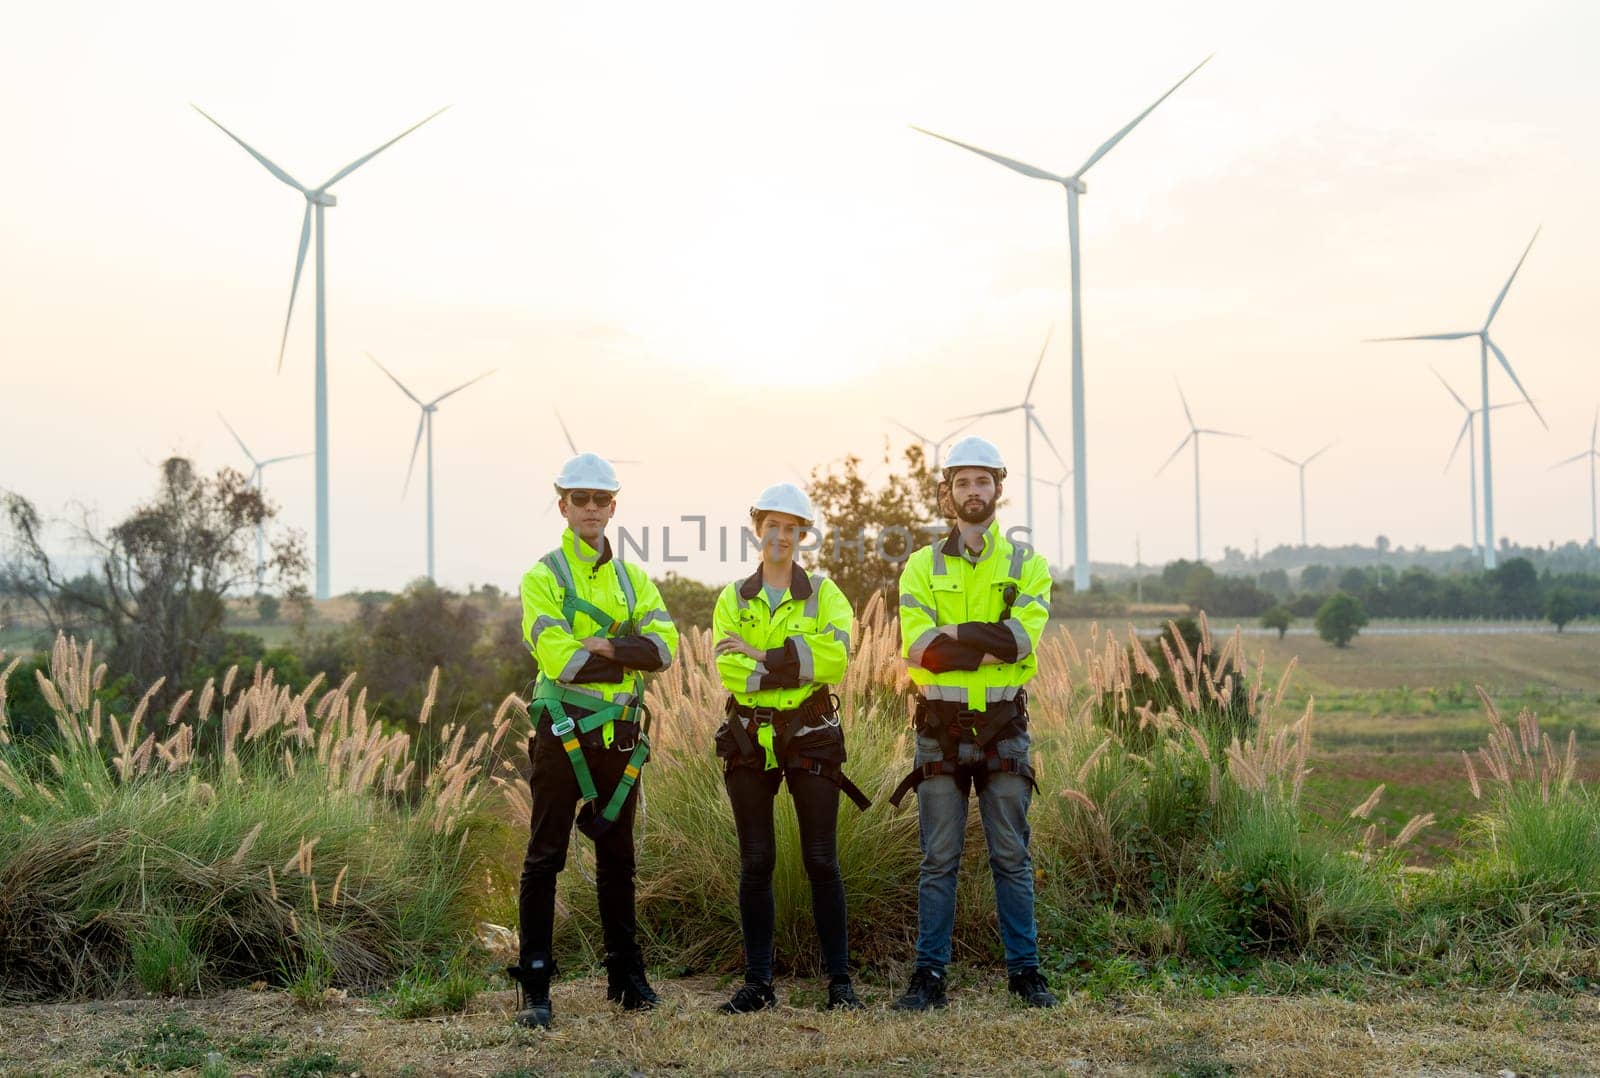 Group of technician workers stand with arm crossed and look at camera in front of windmill or wind turbine and evening light in area of power plant.